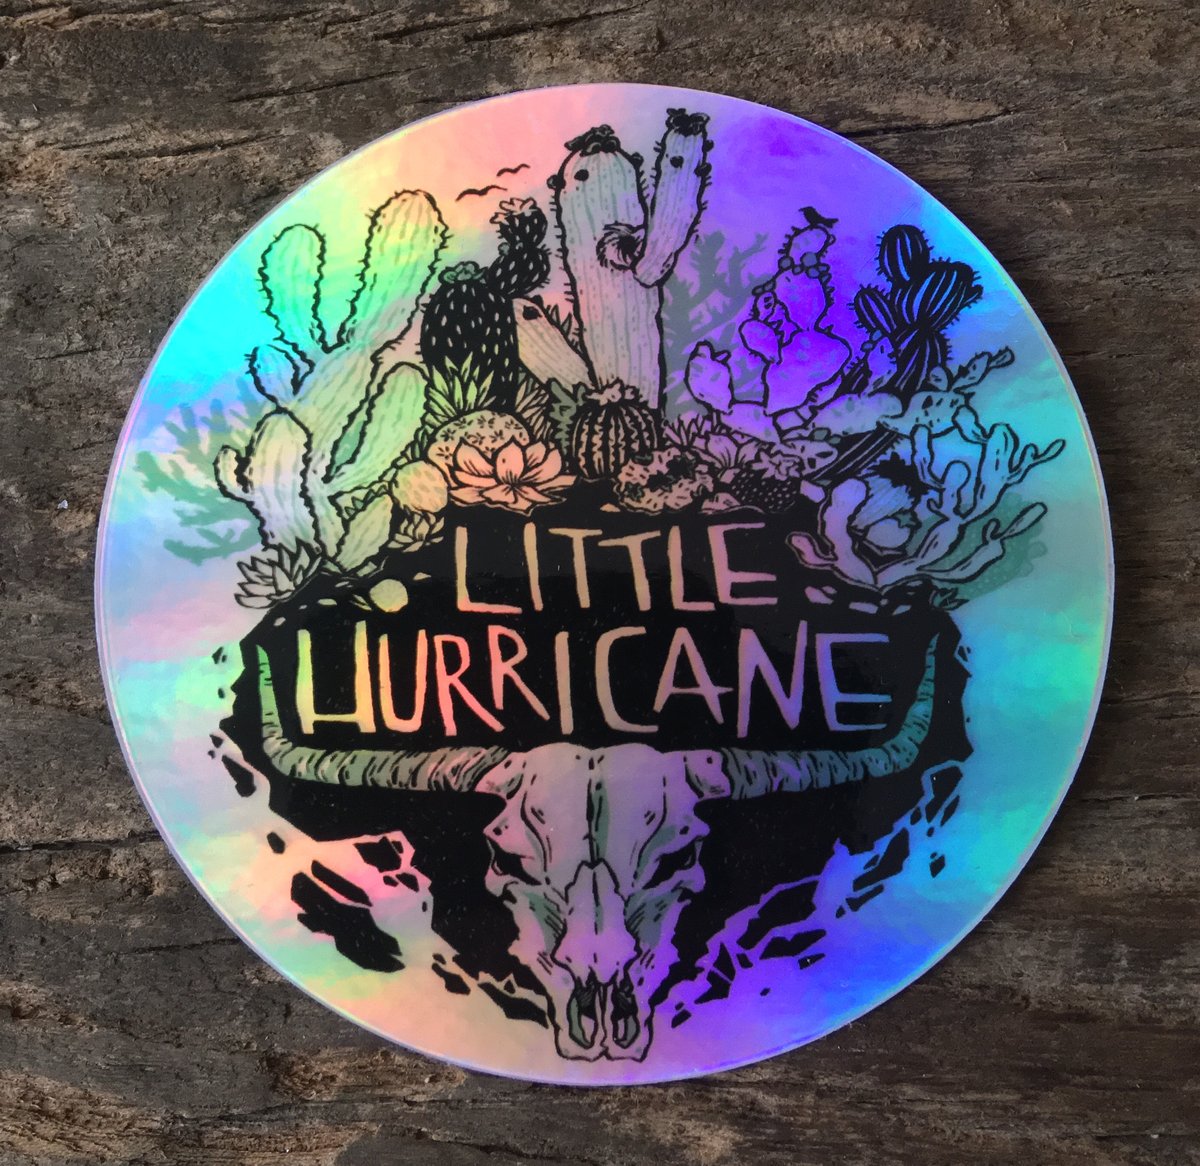 Image of Little Hurricane "Cactus" Holographic sticker